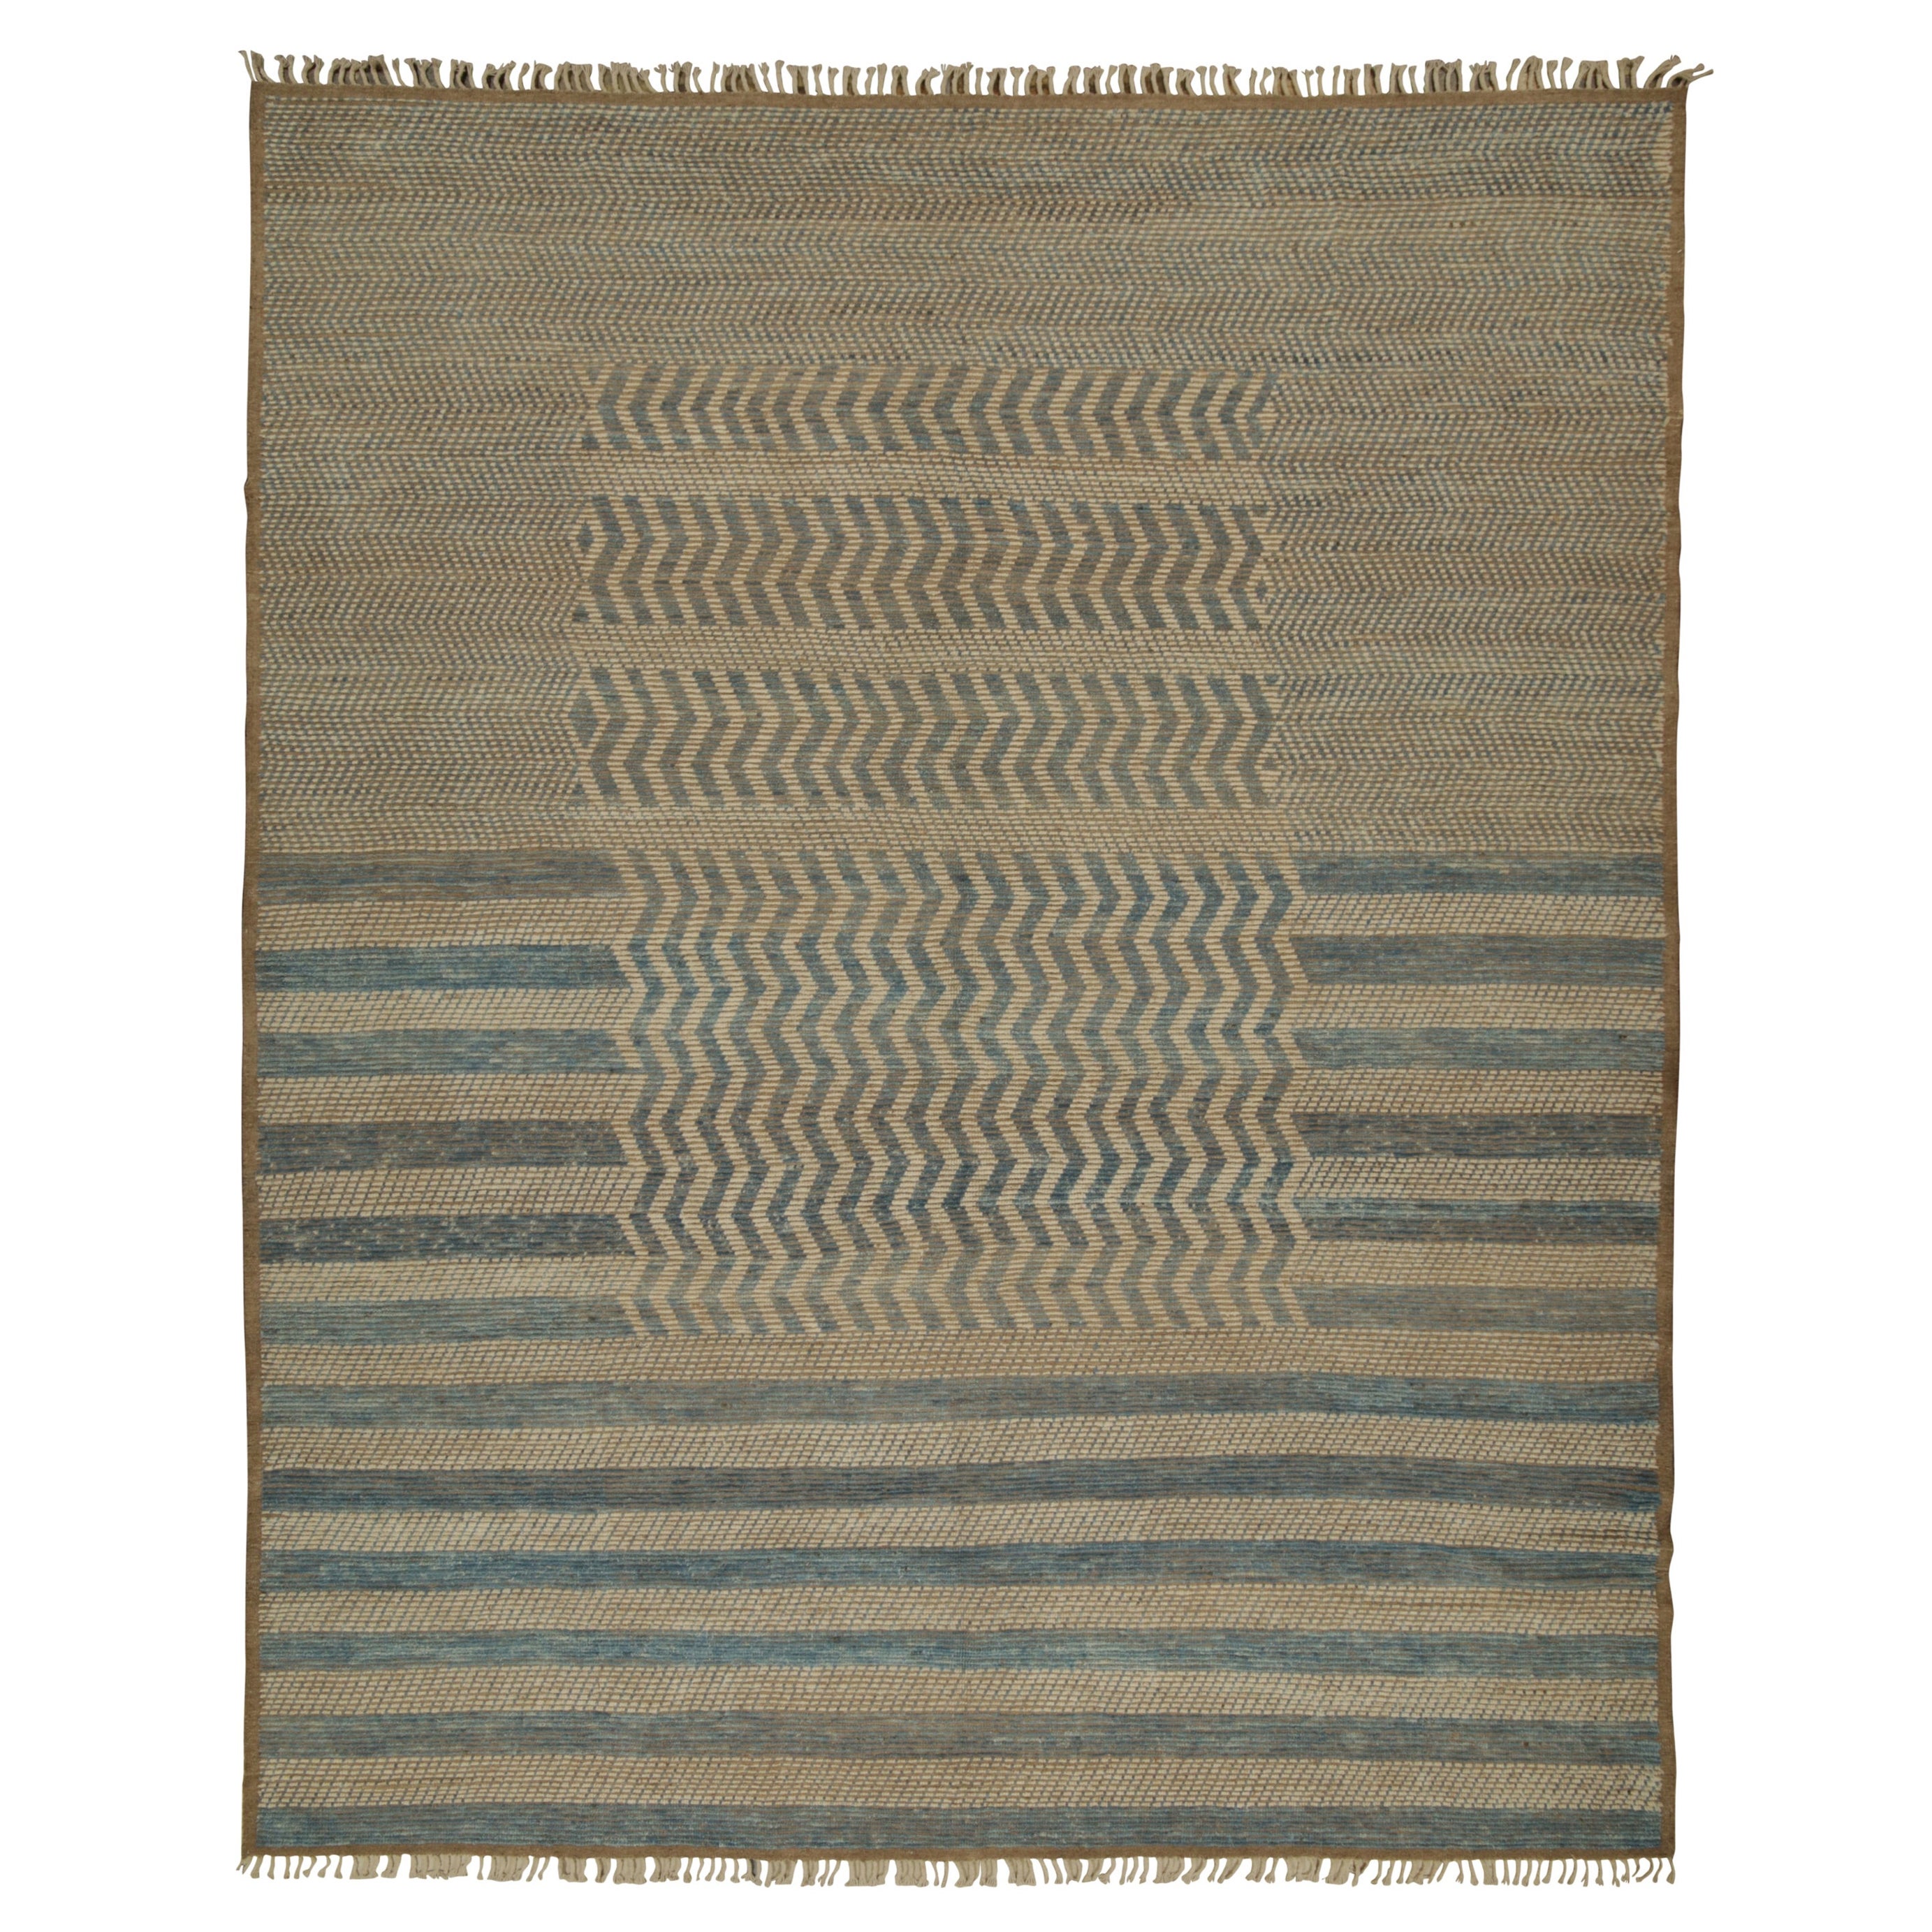 Rug & Kilim’s Moroccan Style Rug in Beige-Brown and Blue Stripes and Chevrons For Sale